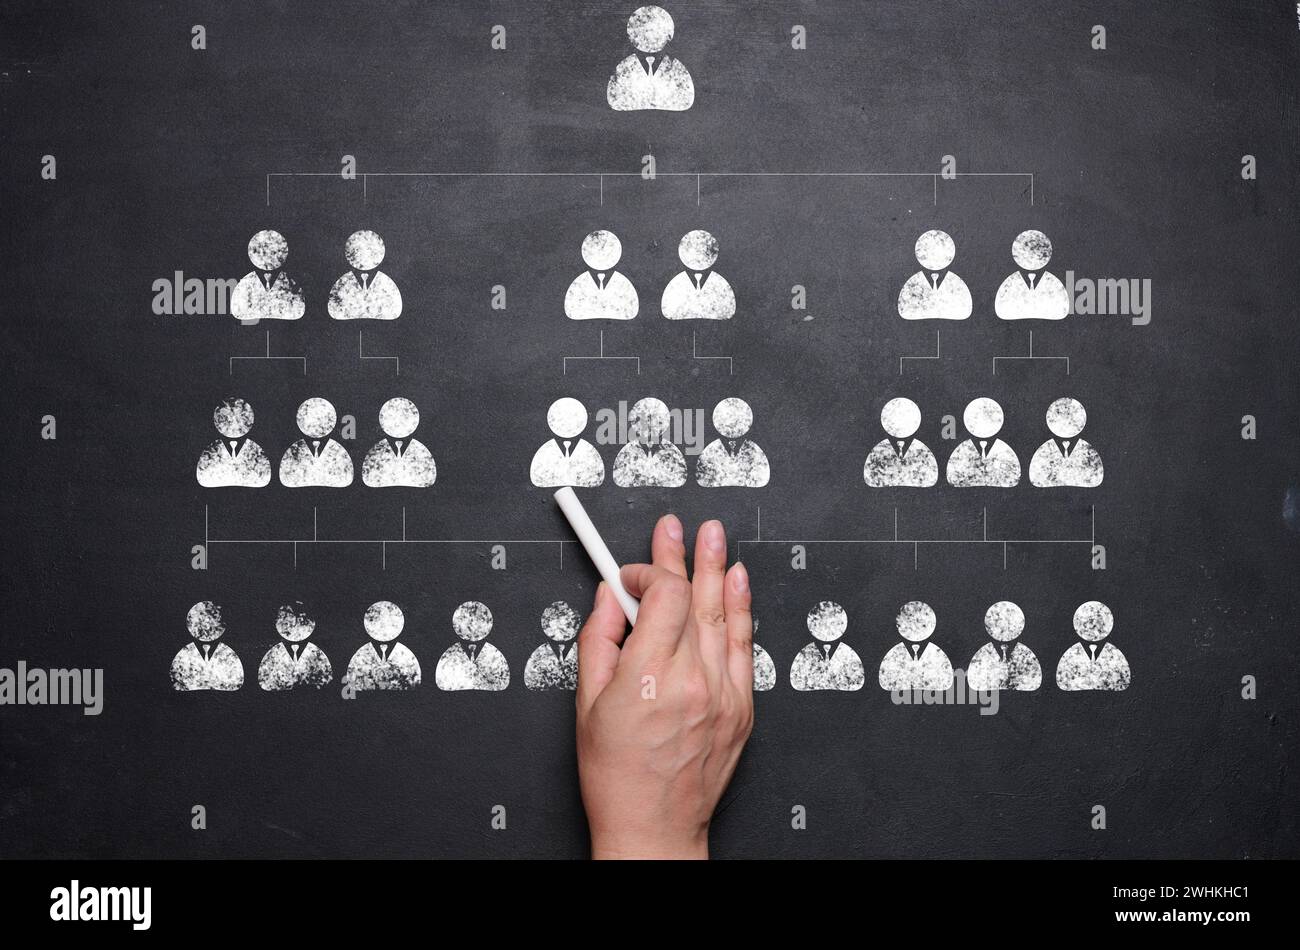 The concept of corporate hierarchy, human resource management, recruitment. Chalk drawn persoanal icons Stock Photo